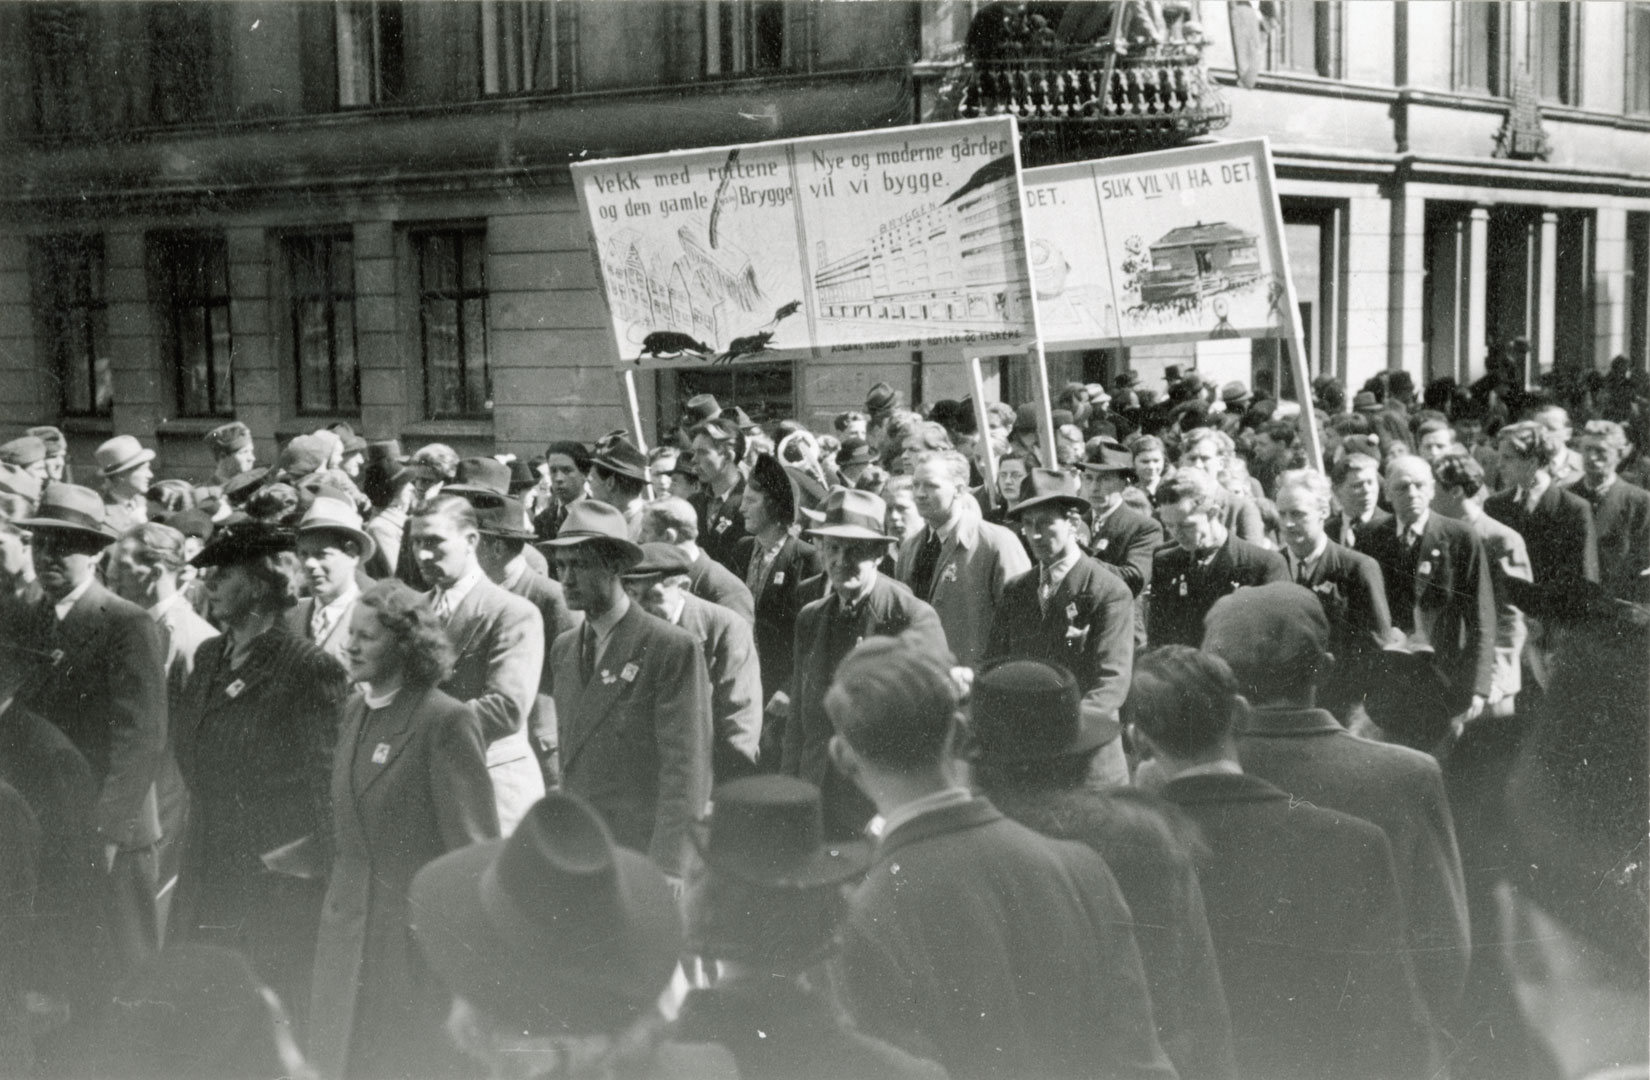 Demonstration for the demolishing of Bryggen in Bergen in 1945/1946. There were calls to demolish “German bryggen” around 1900, after the Second World War and in the 1950s. Today, Bryggen in Bergen is considered a national treasure and has been inscribed on the UNESCO World Heritage List. It is also one of Norway’s top tourist attractions. Photo: Unknown, the Directorate for Cultural Heritage